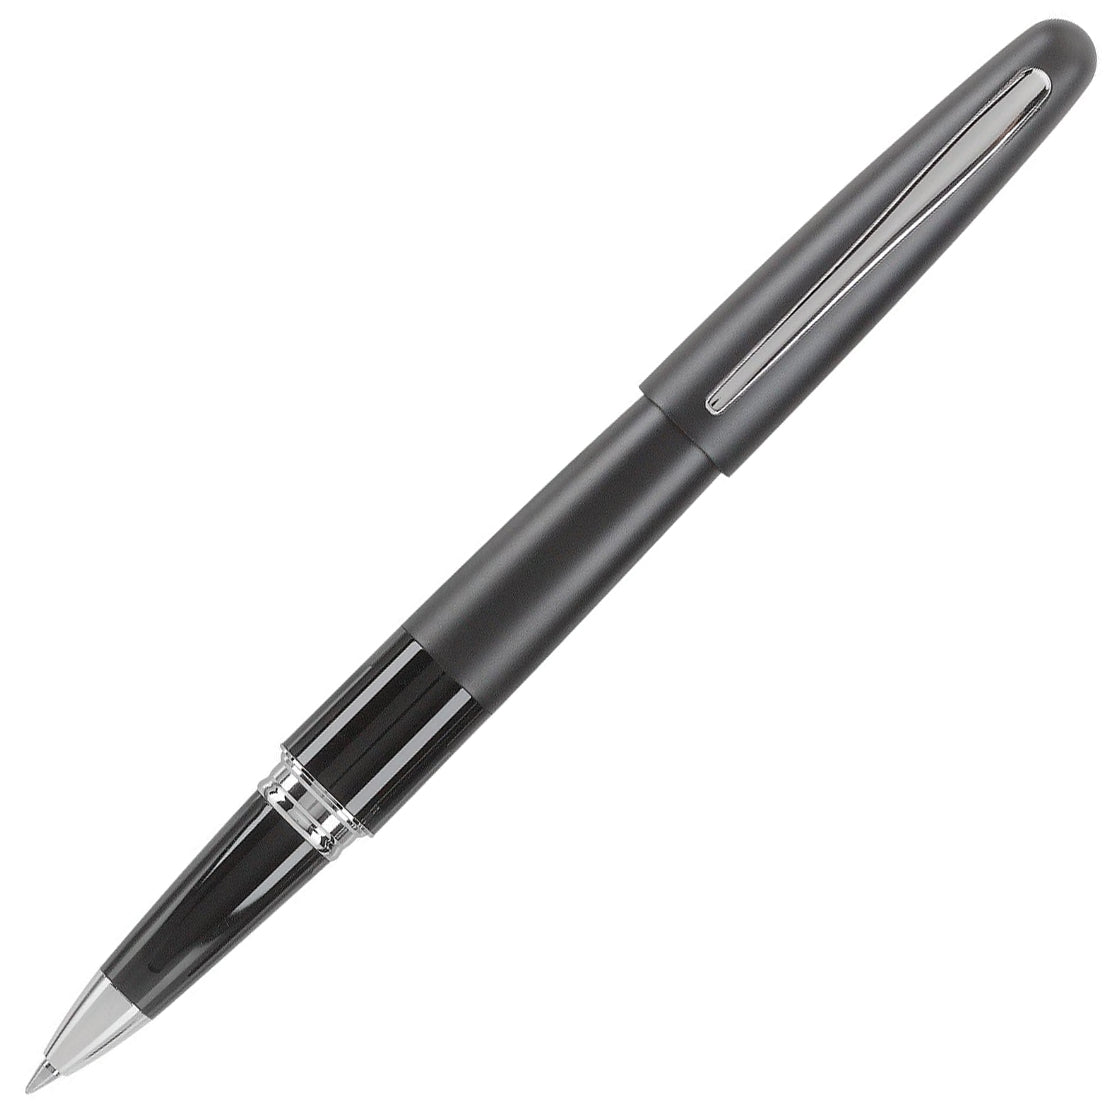 Pilot's name is synonymous with high quality and workmanship in the Pen market. They are also known as a luxury brand with great writing instruments. Made in Japan this company was founded in 1918